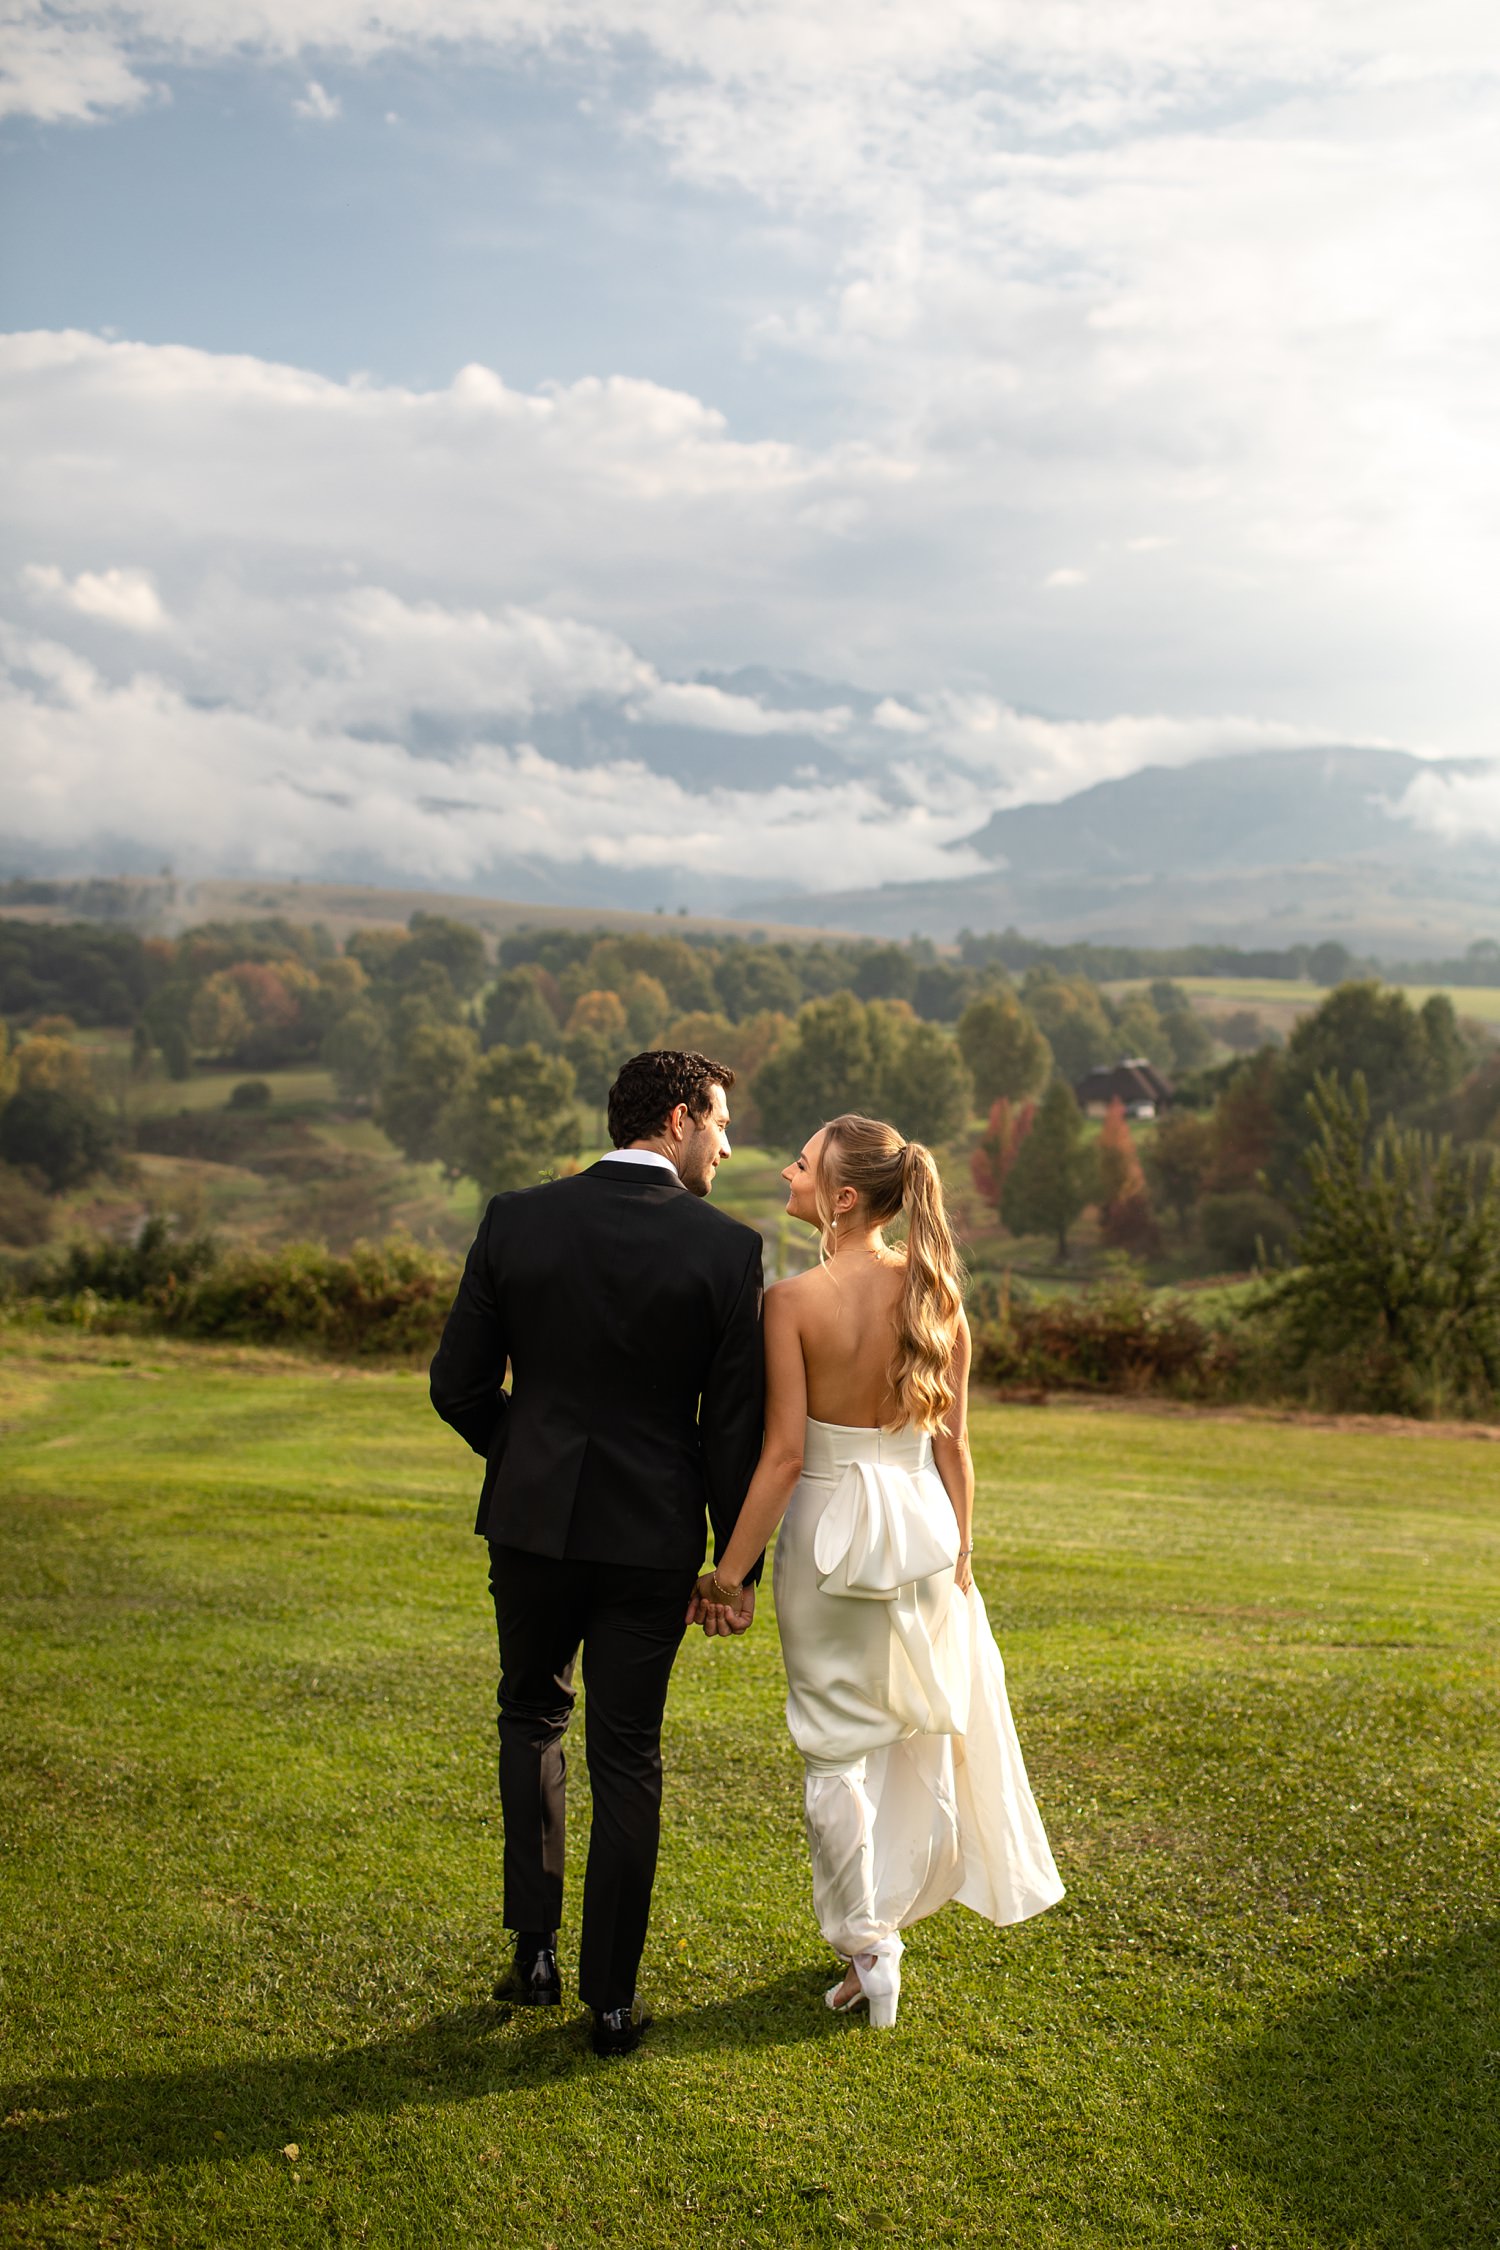 Beautiful Autumn scenery with views over the Champagne Sports Golf Course and Central Drakensberg mountain range as the bride and groom walk away from the camera at their wedding.